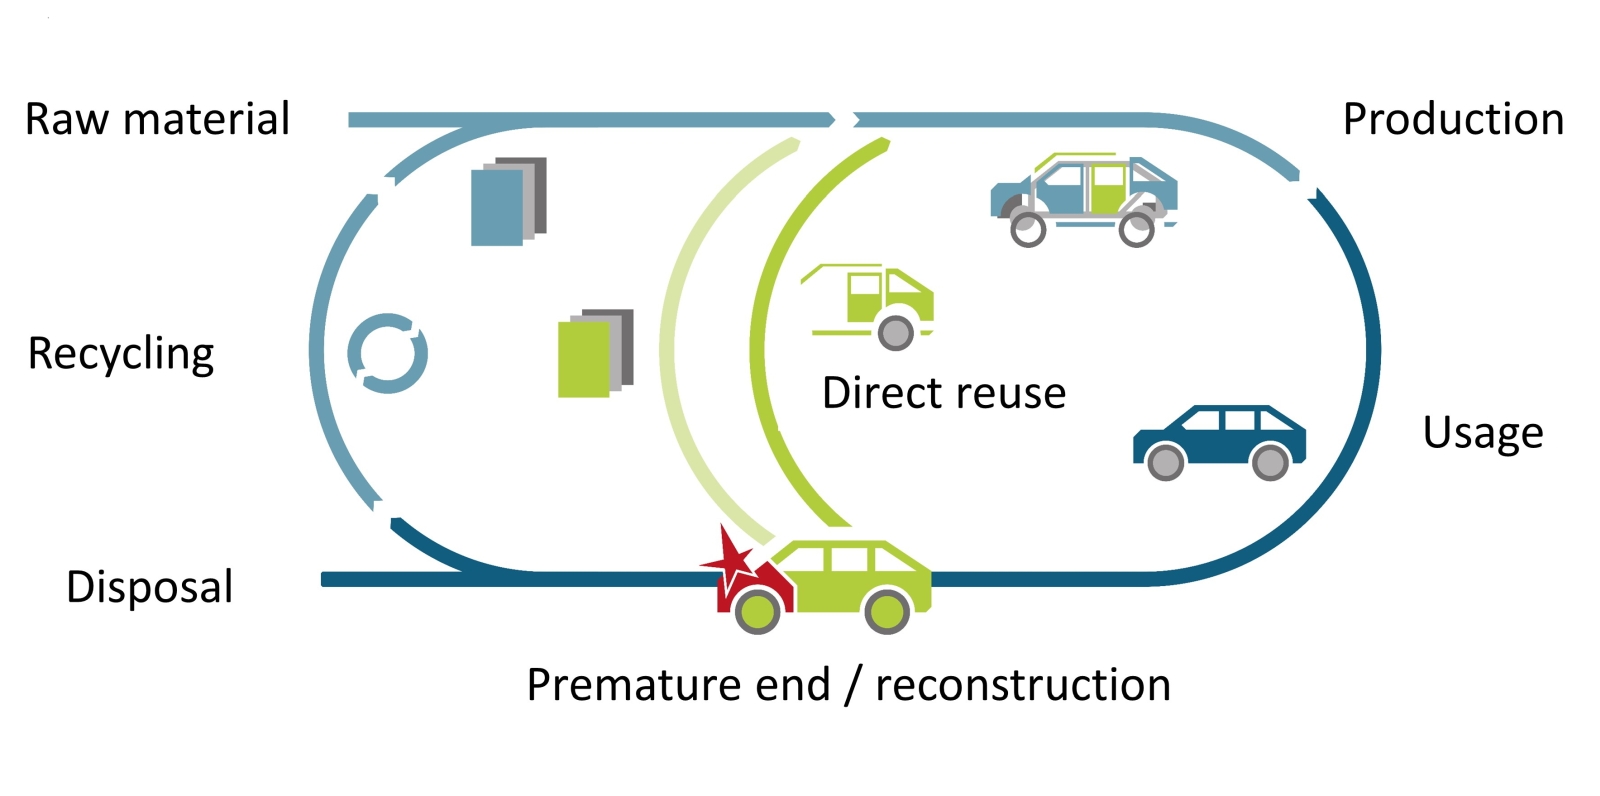 EKODA’s circular economy strategy is intended to disrupt the single-minded fixation on recycling. It uses an evaluation system to check the suitability of components for reuse or repurposing.